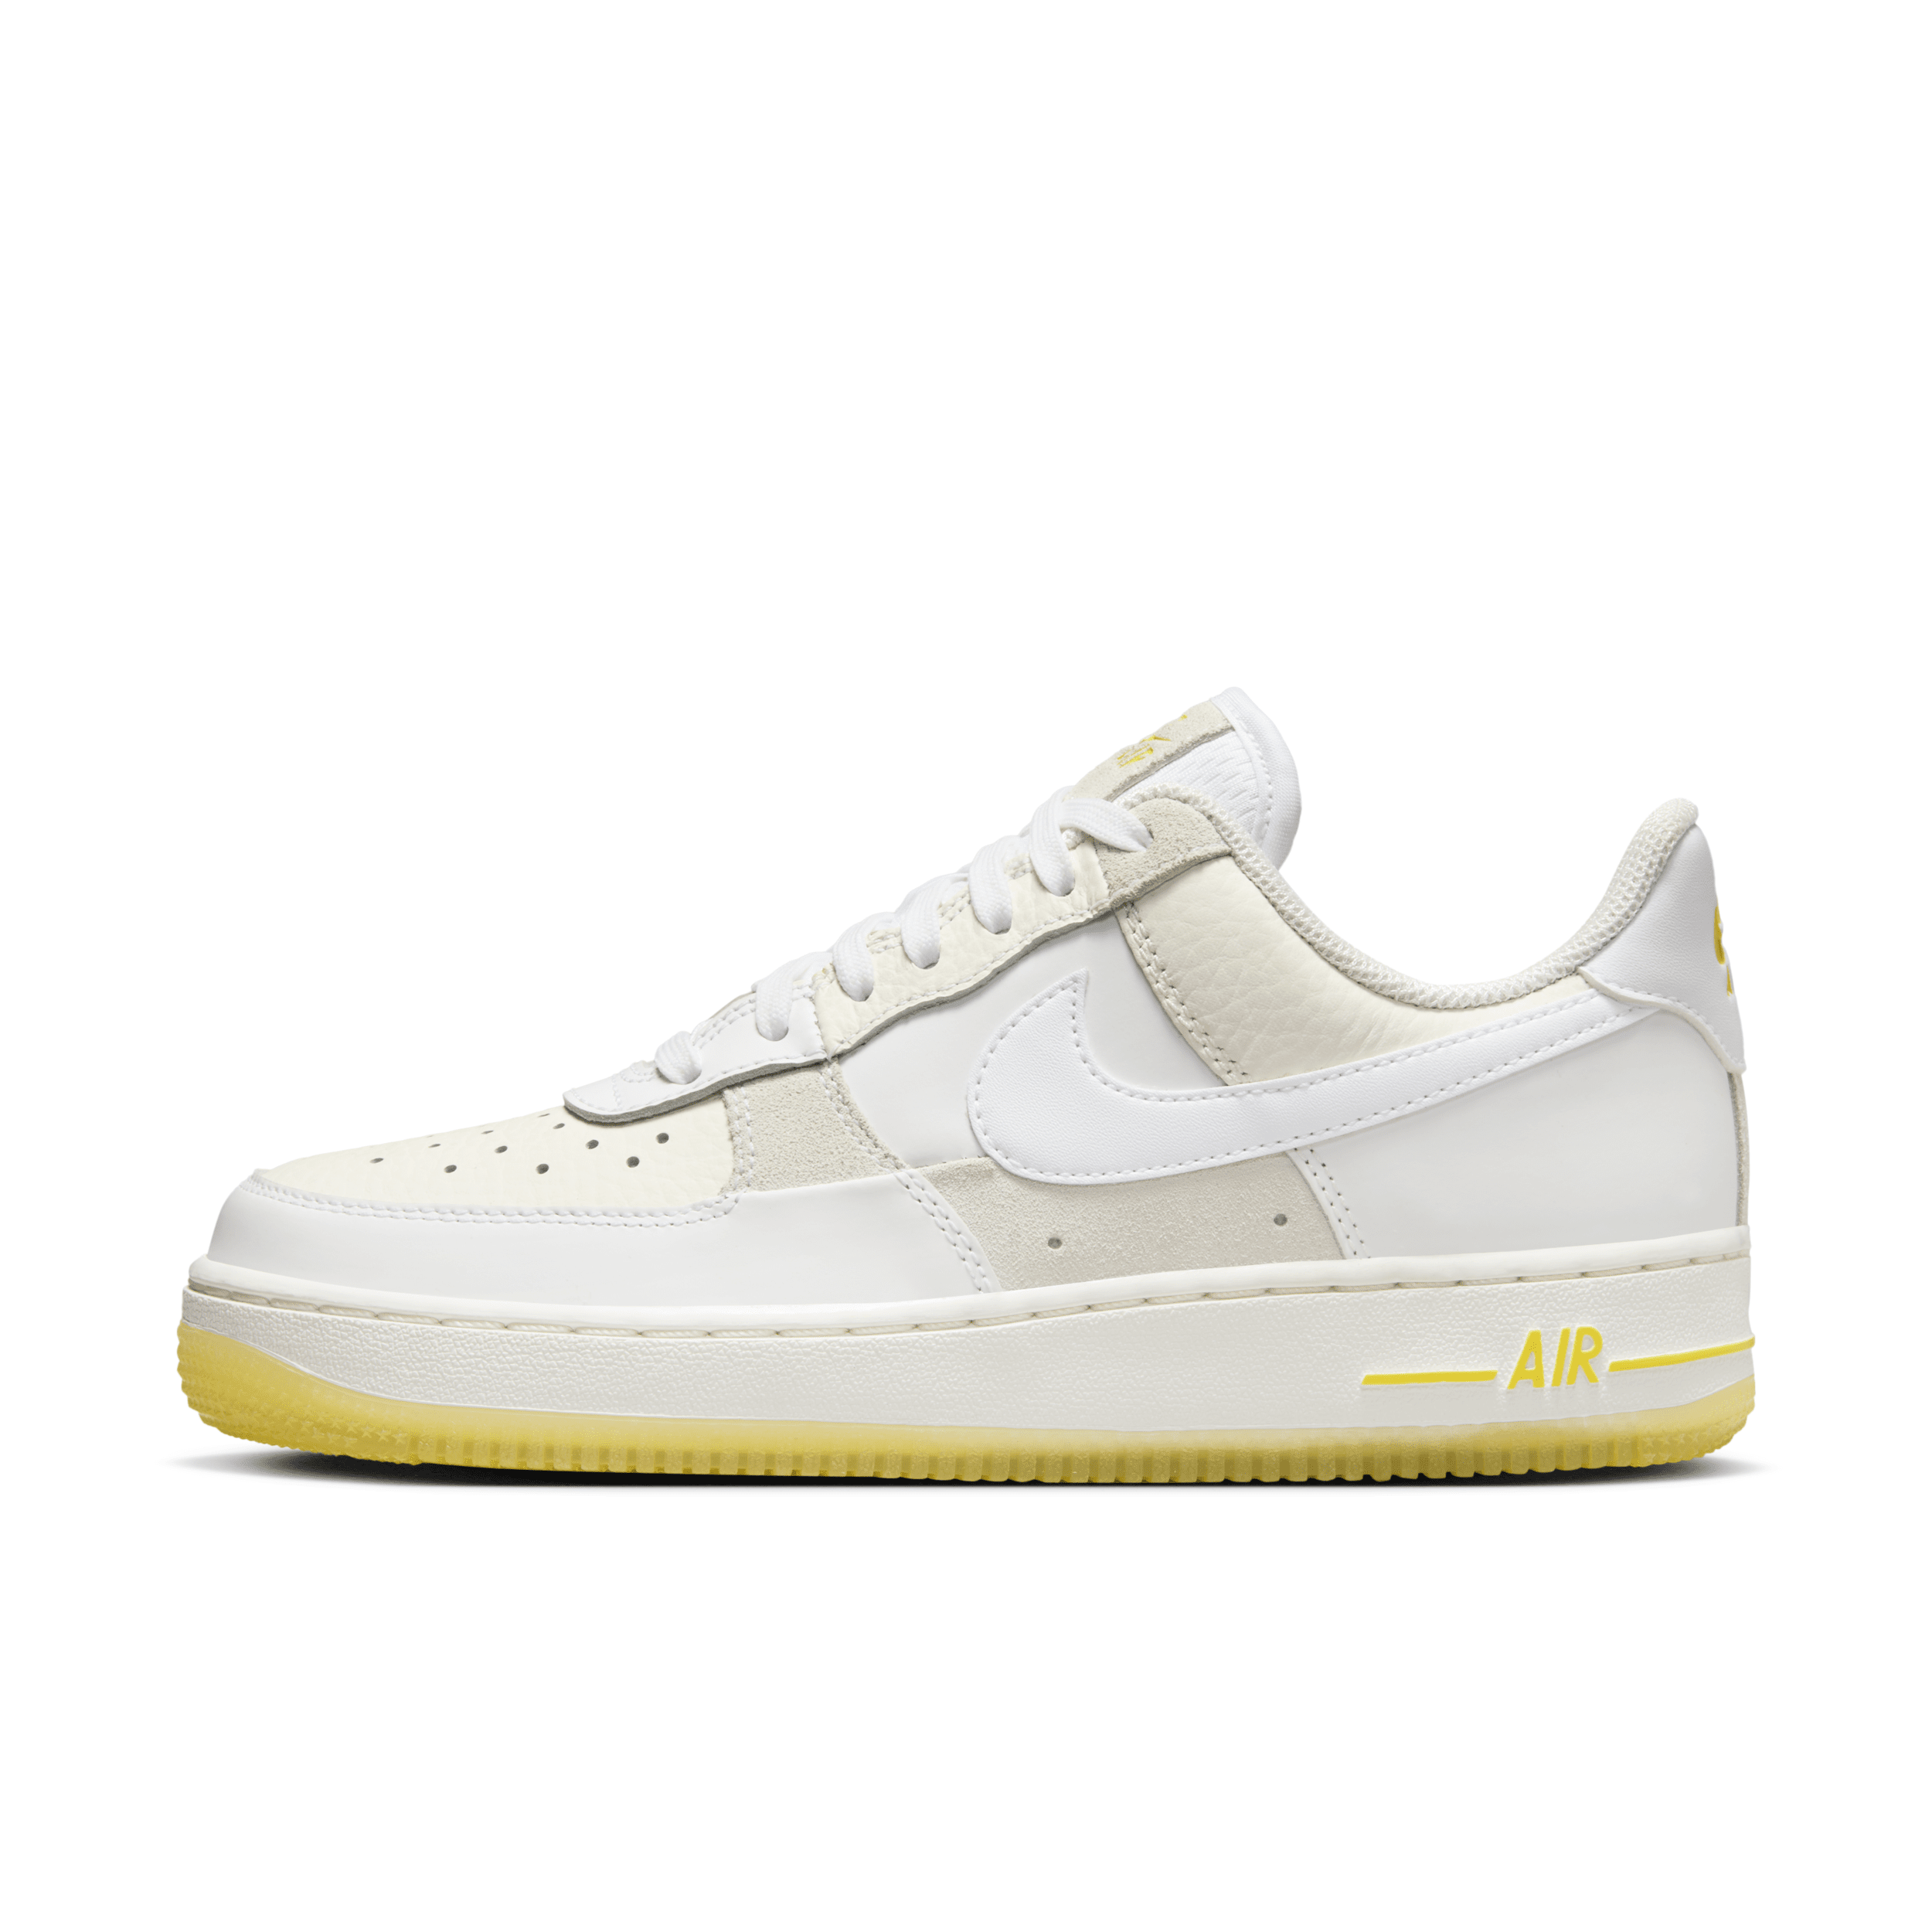 Nike Women's Air Force 1 '07 Low Shoes in White, Size: 7.5 | FQ0709-100